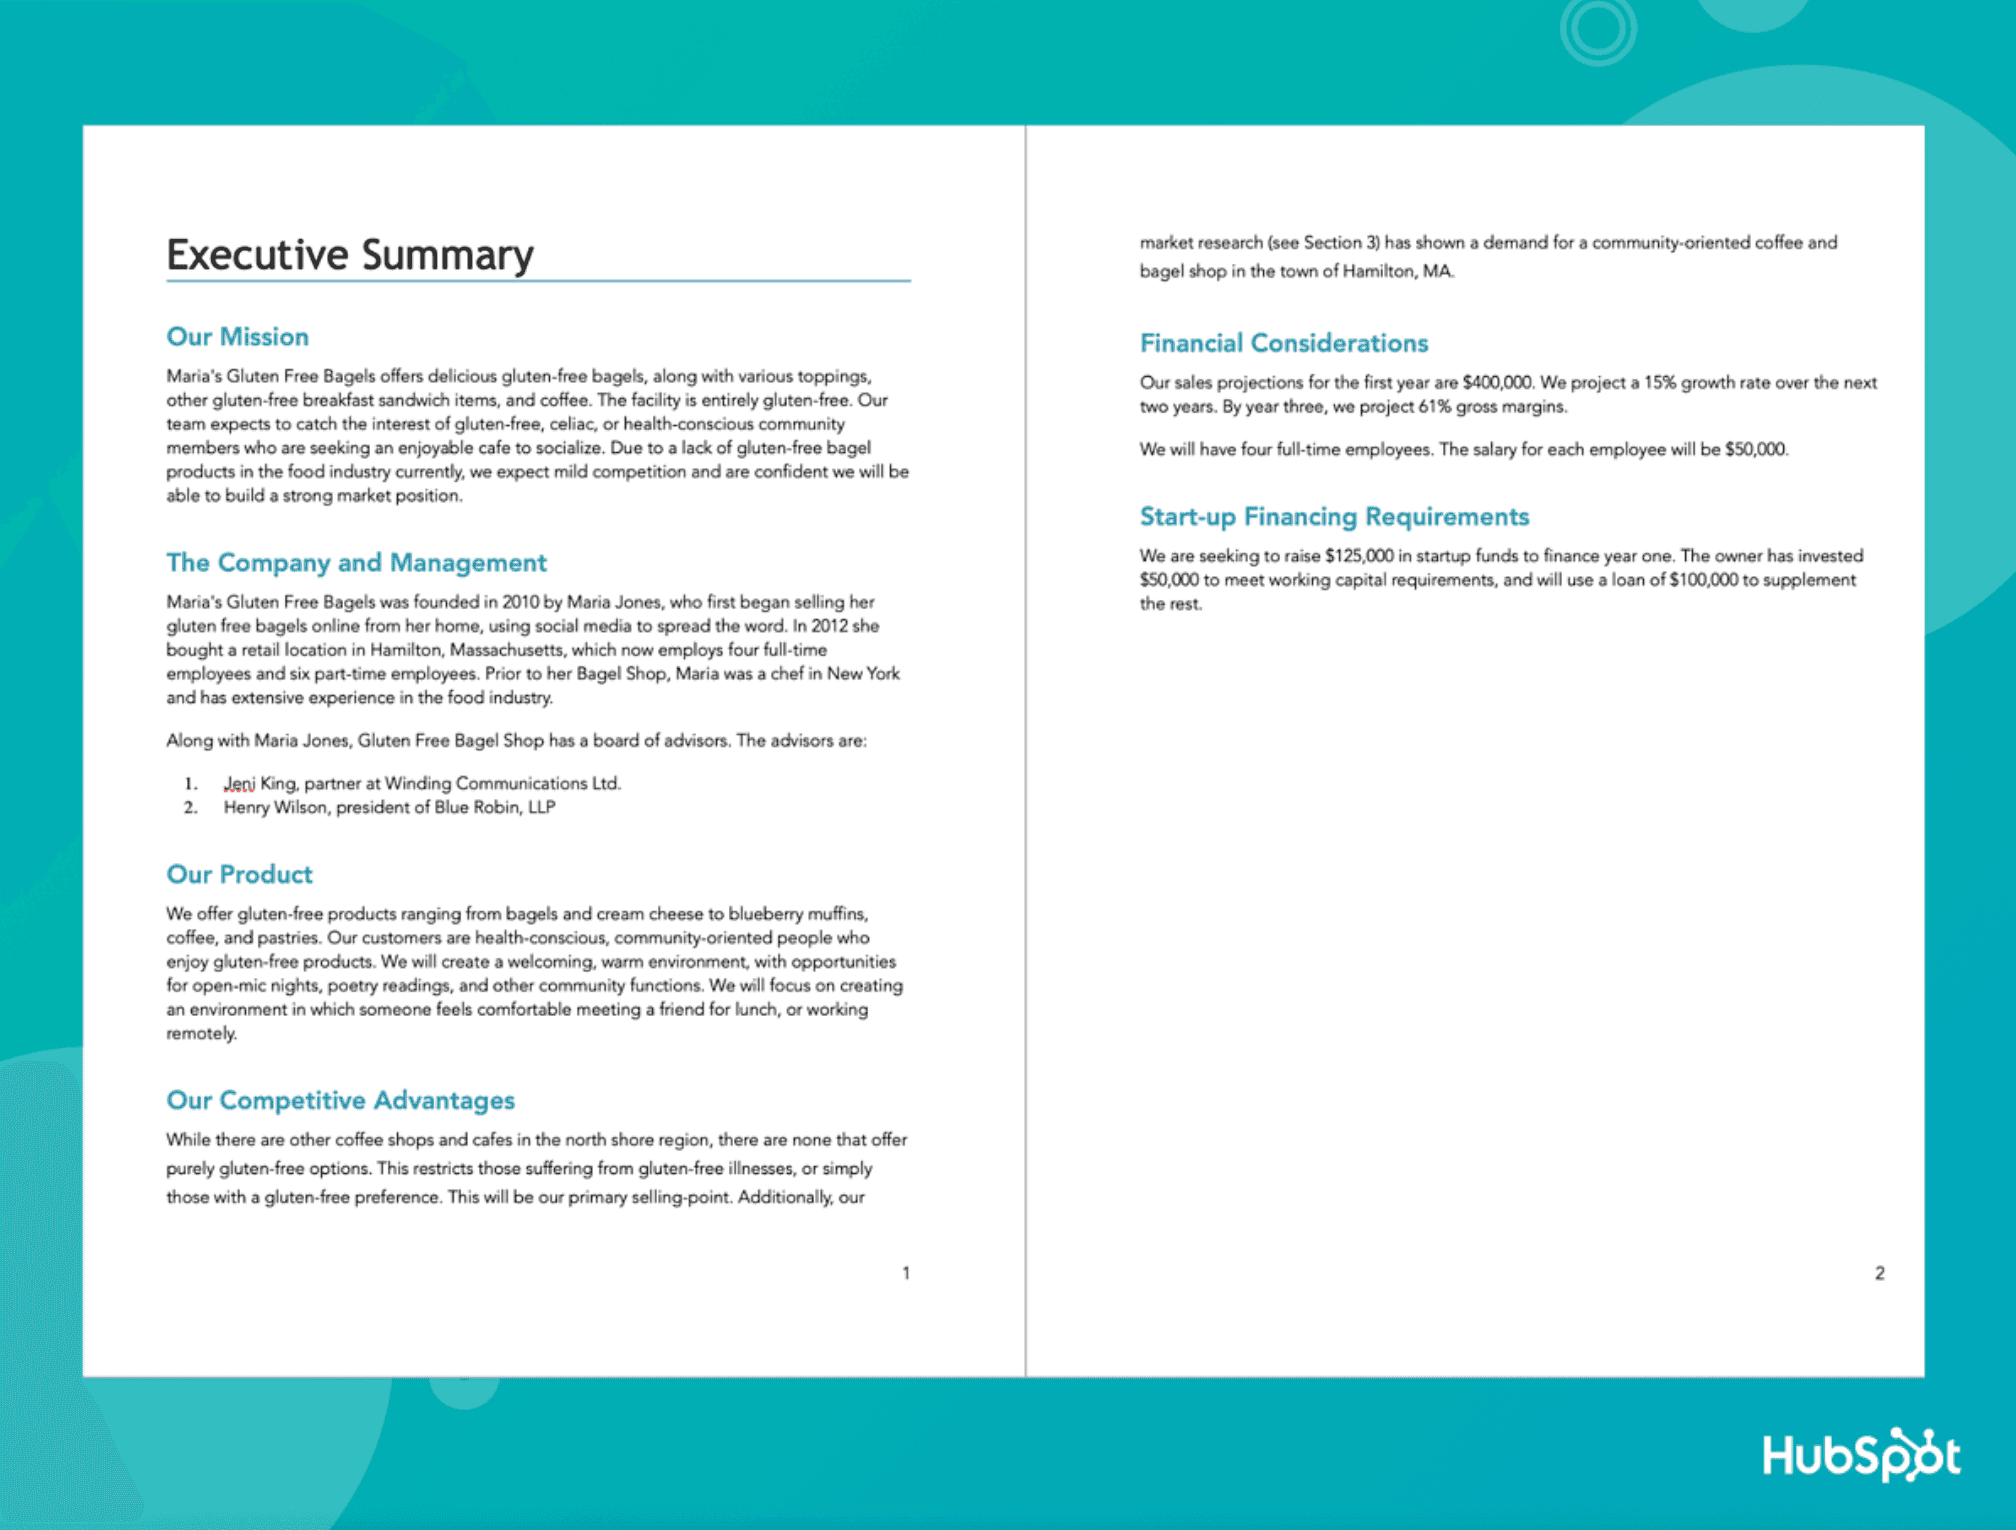 An example of a two page executive summary created by hubspot.